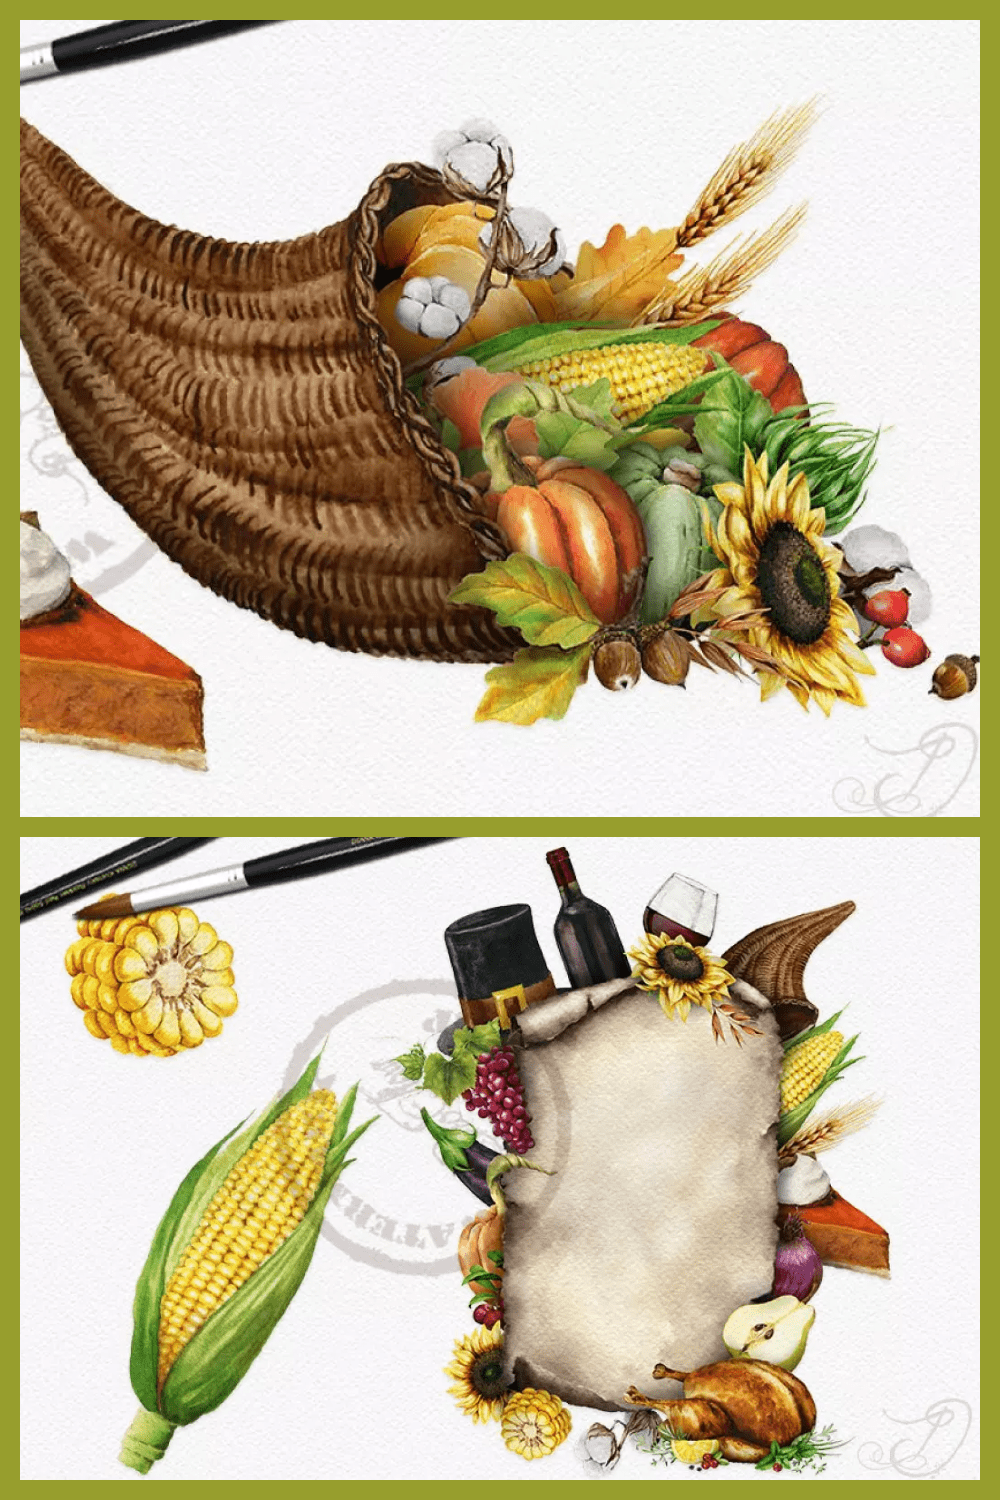 Collage of autumn harvest illustrations in a basket.